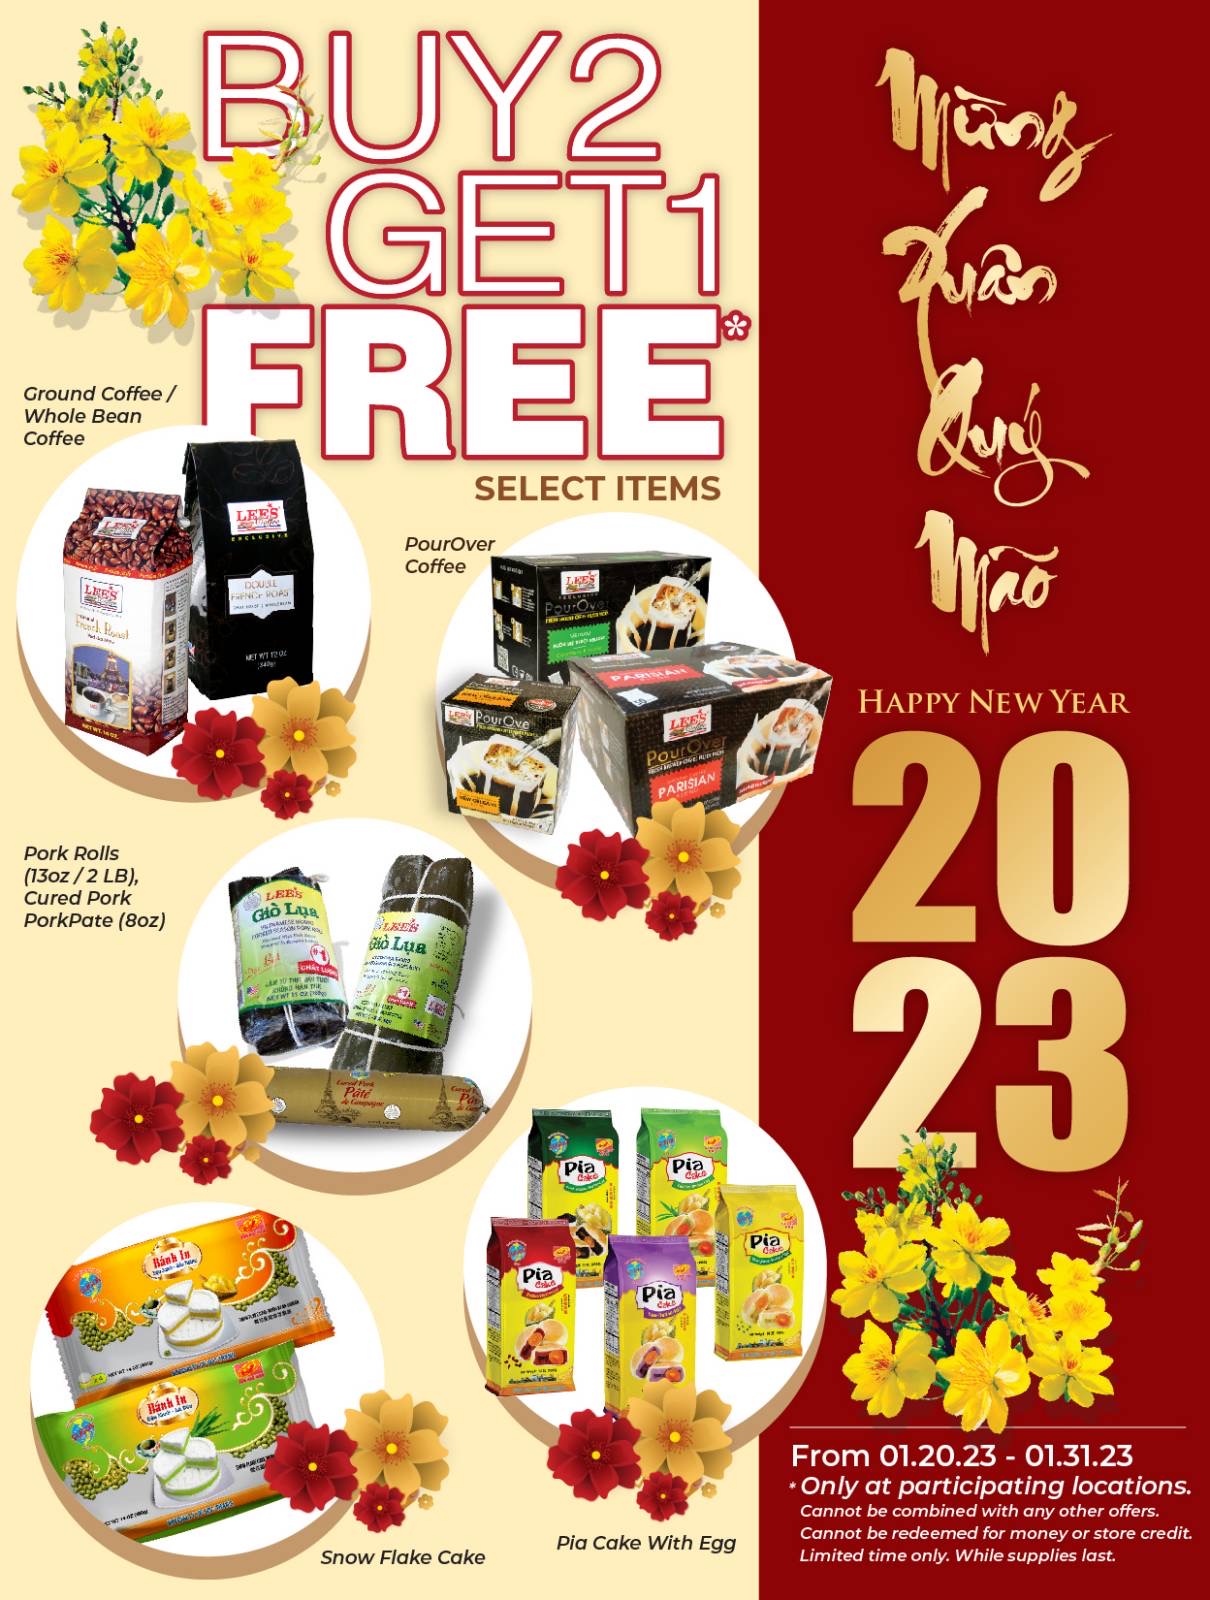 Start a joyful Lunar New Year with our Buy 2 Get 1 Promotion! Only from 01.20 to 01.31.2023 at participating locations.